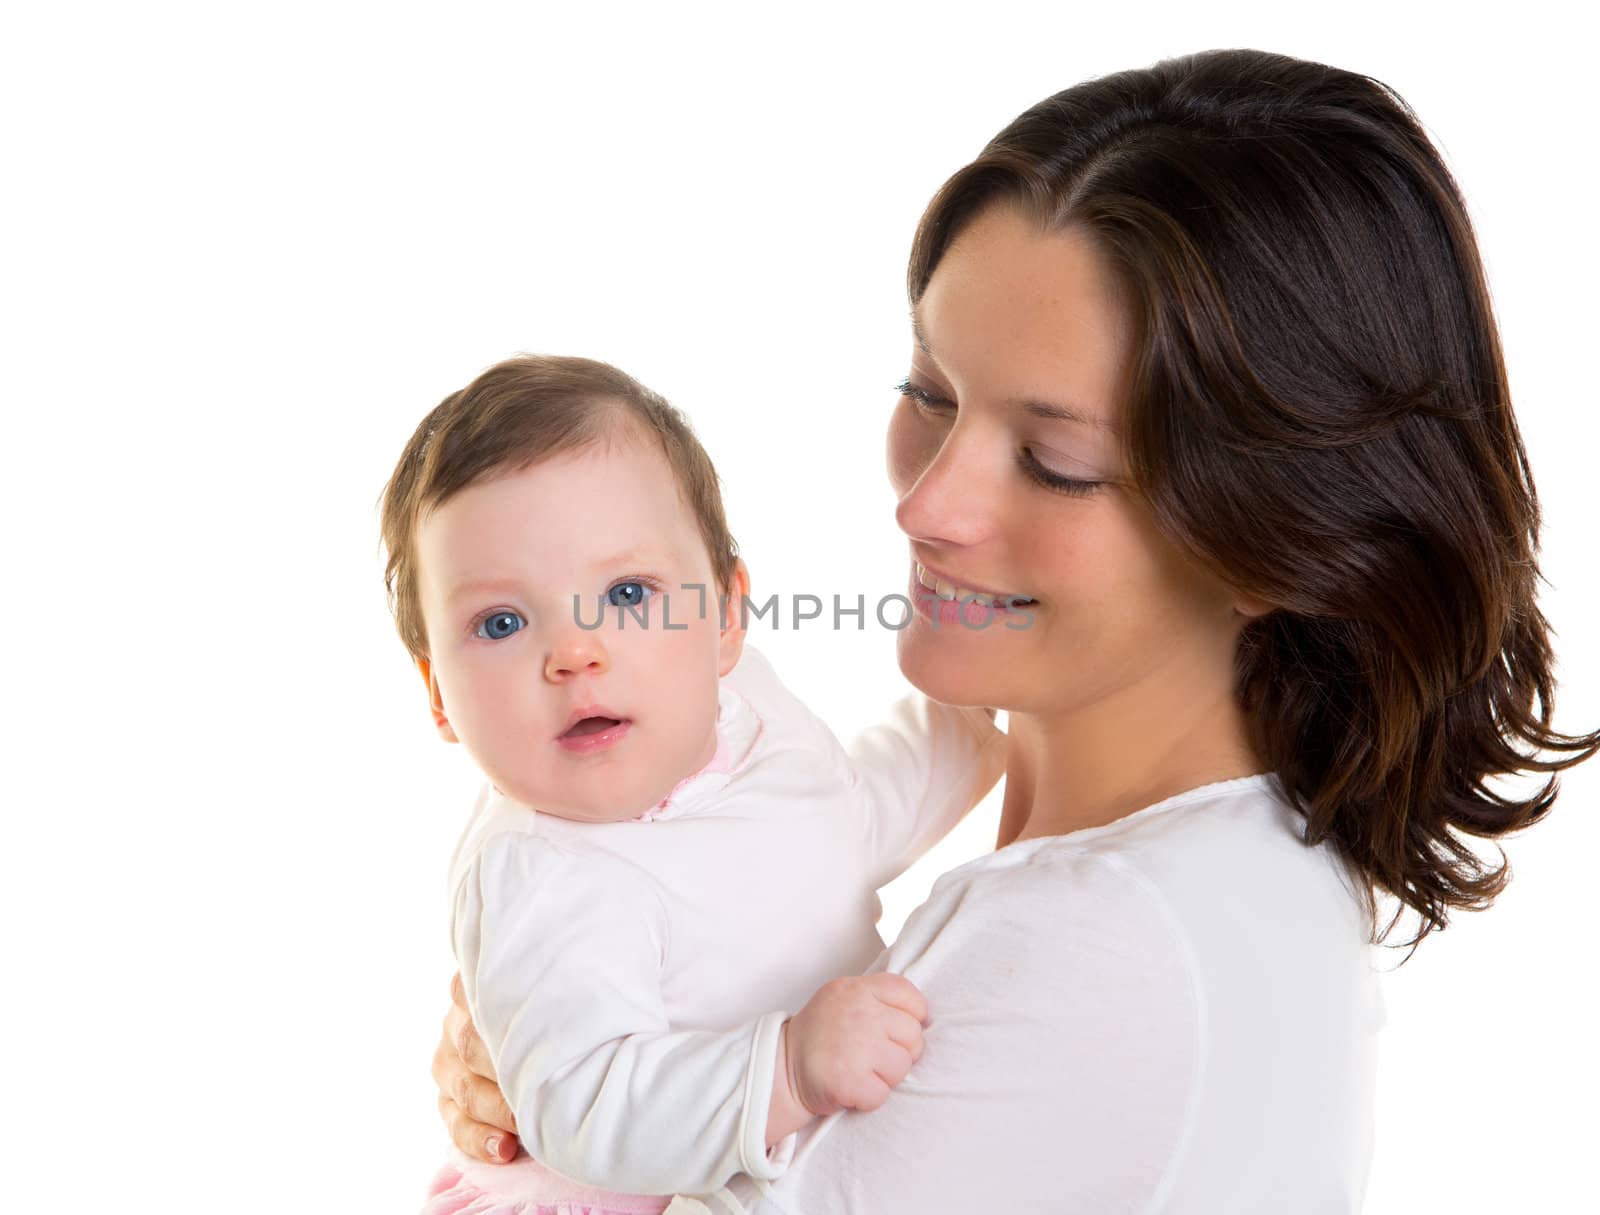 Baby girl hug in mother arms happy on white background